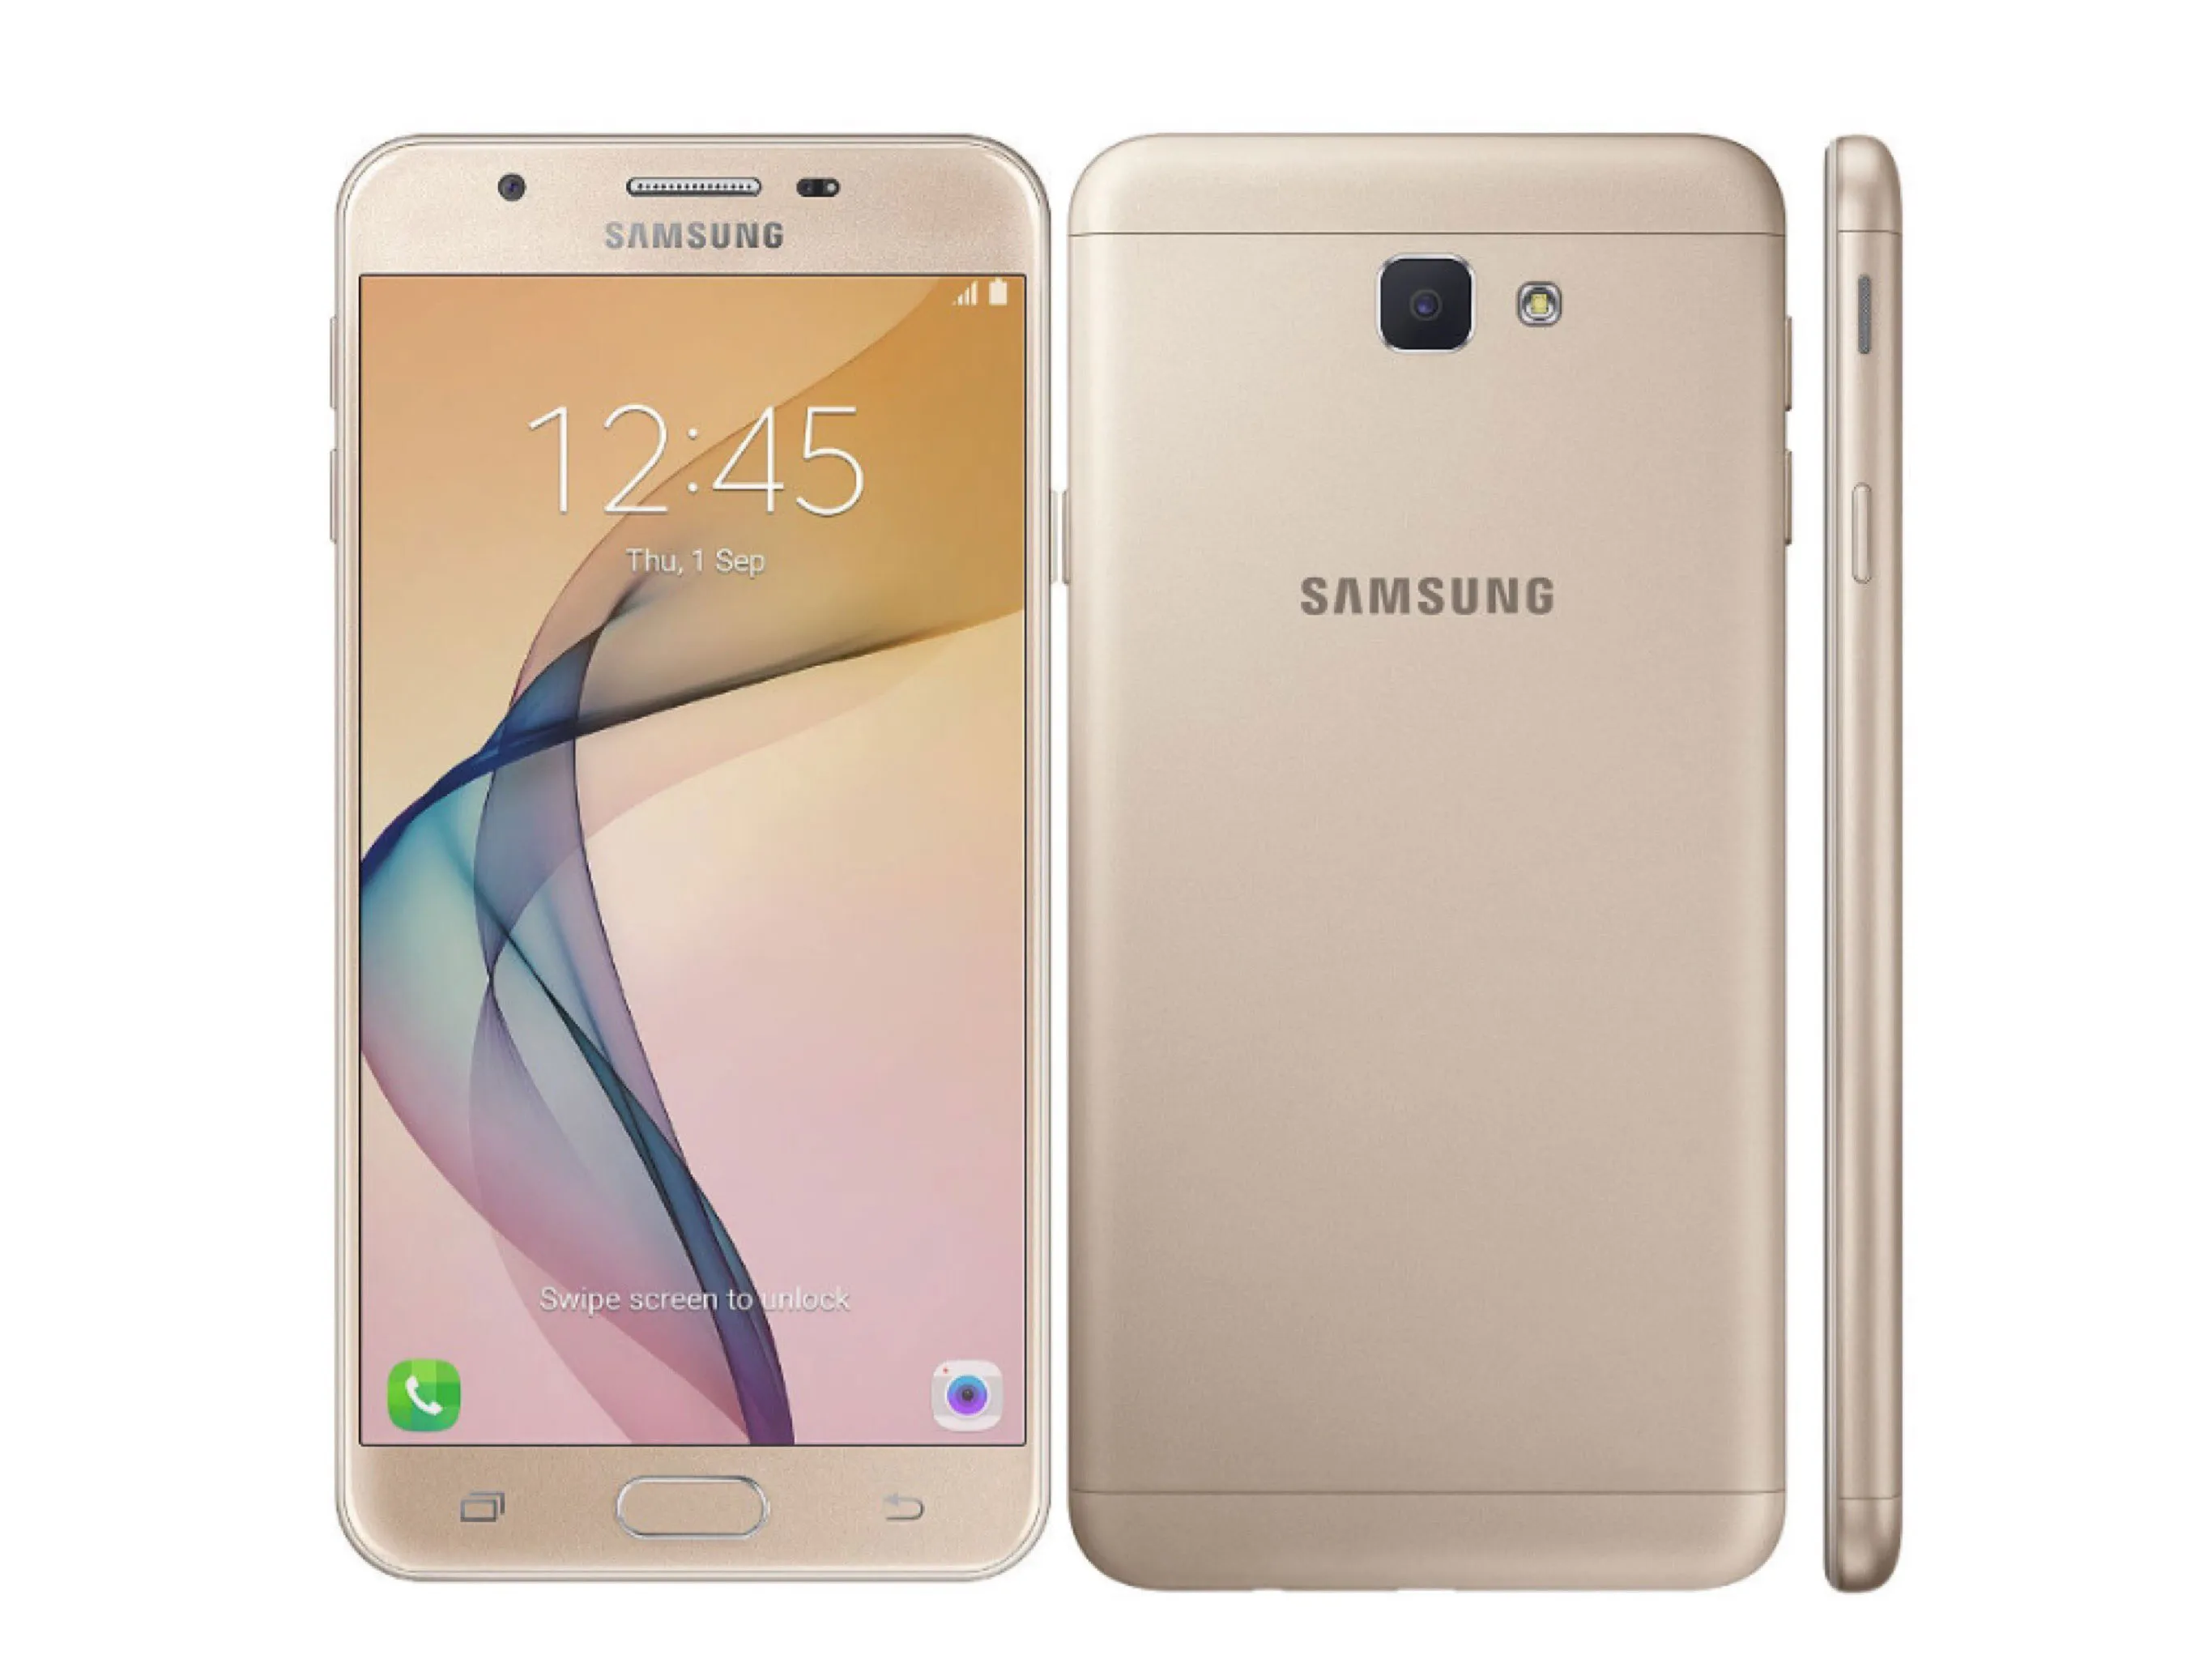 [Troubleshooting Guide] What to do if your Samsung Galaxy J5 Prime continues rebooting on its own after the rooting method